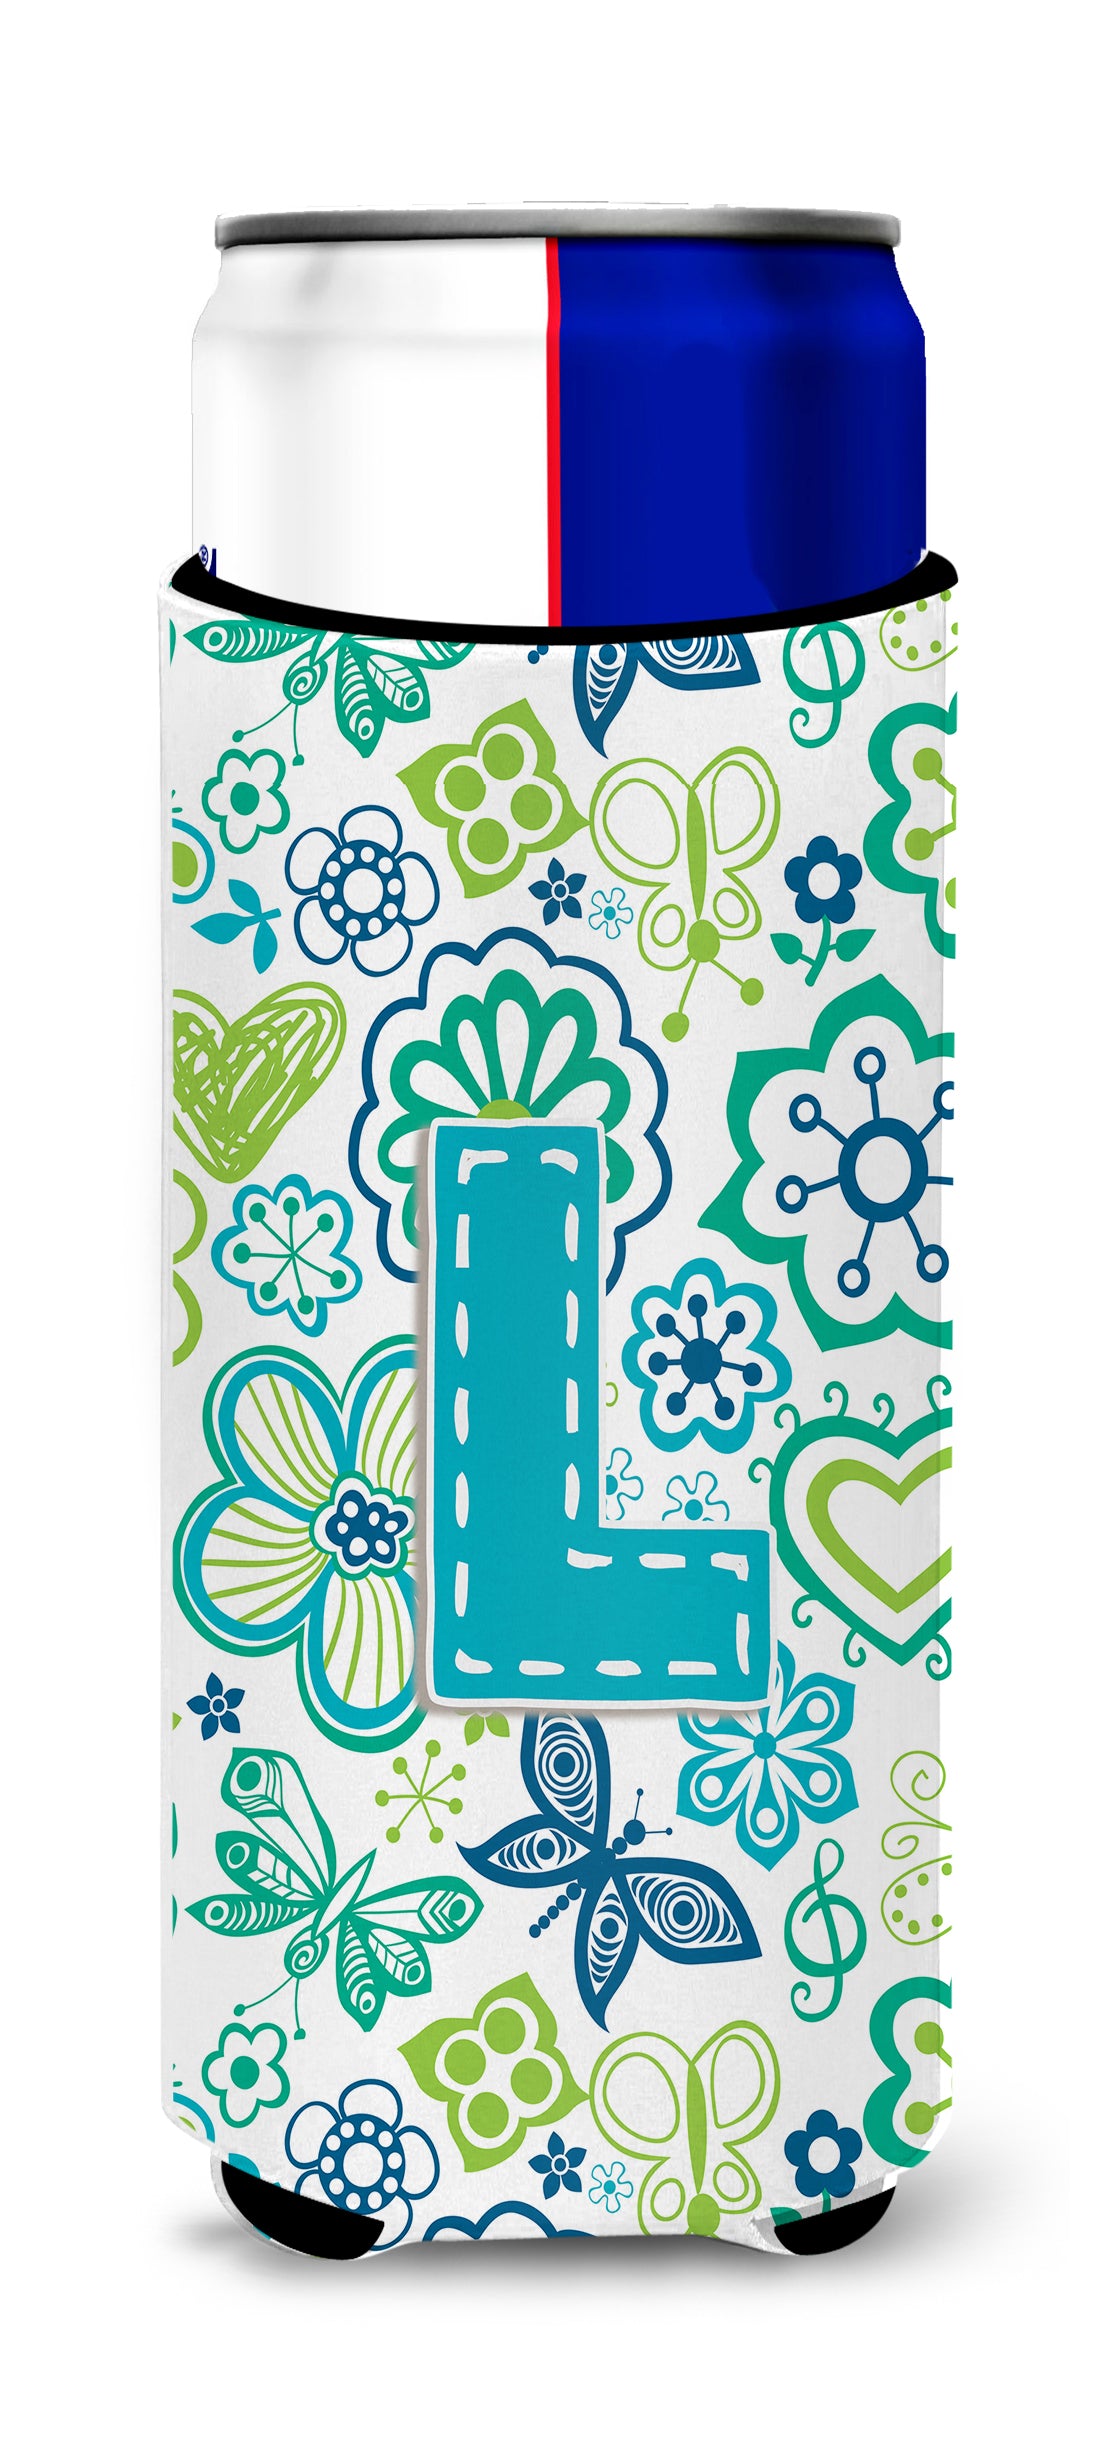 Letter L Flowers and Butterflies Teal Blue Ultra Beverage Insulators for slim cans CJ2006-LMUK.